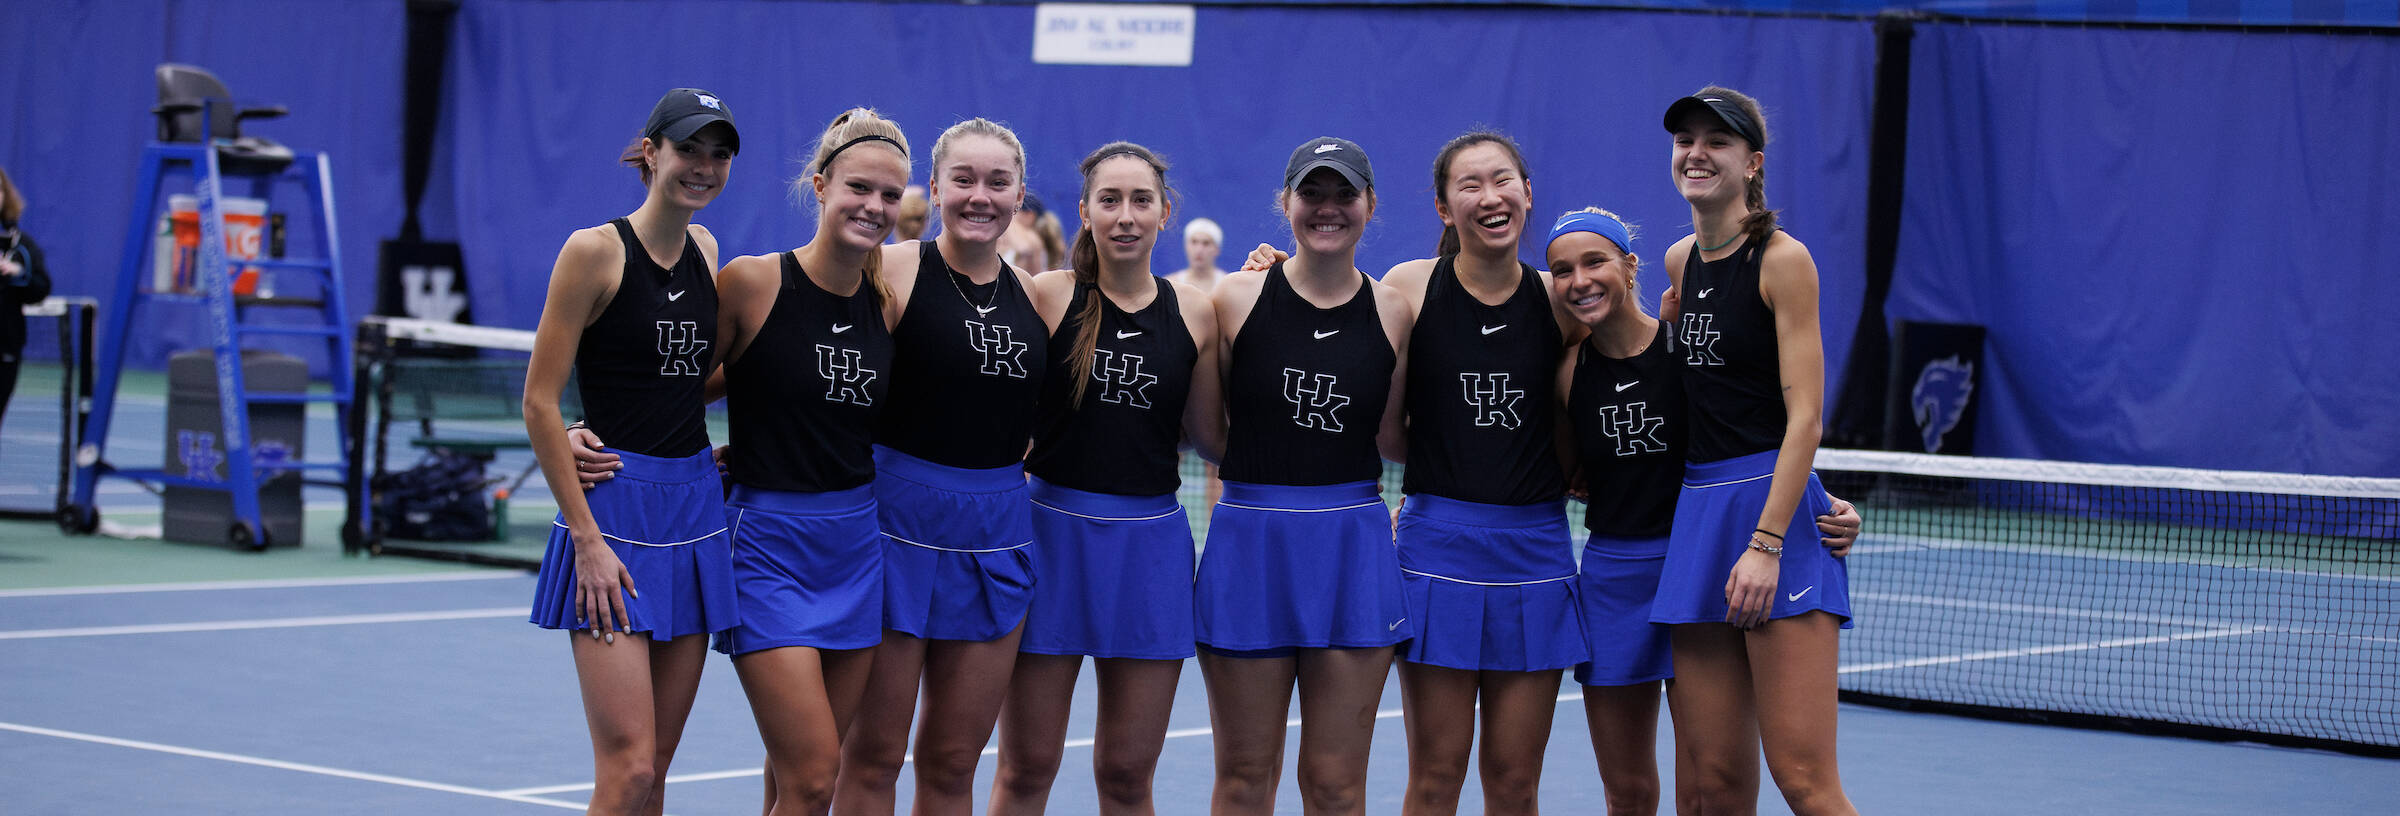 Women’s Tennis Faces Pair of Weekend Road Matches